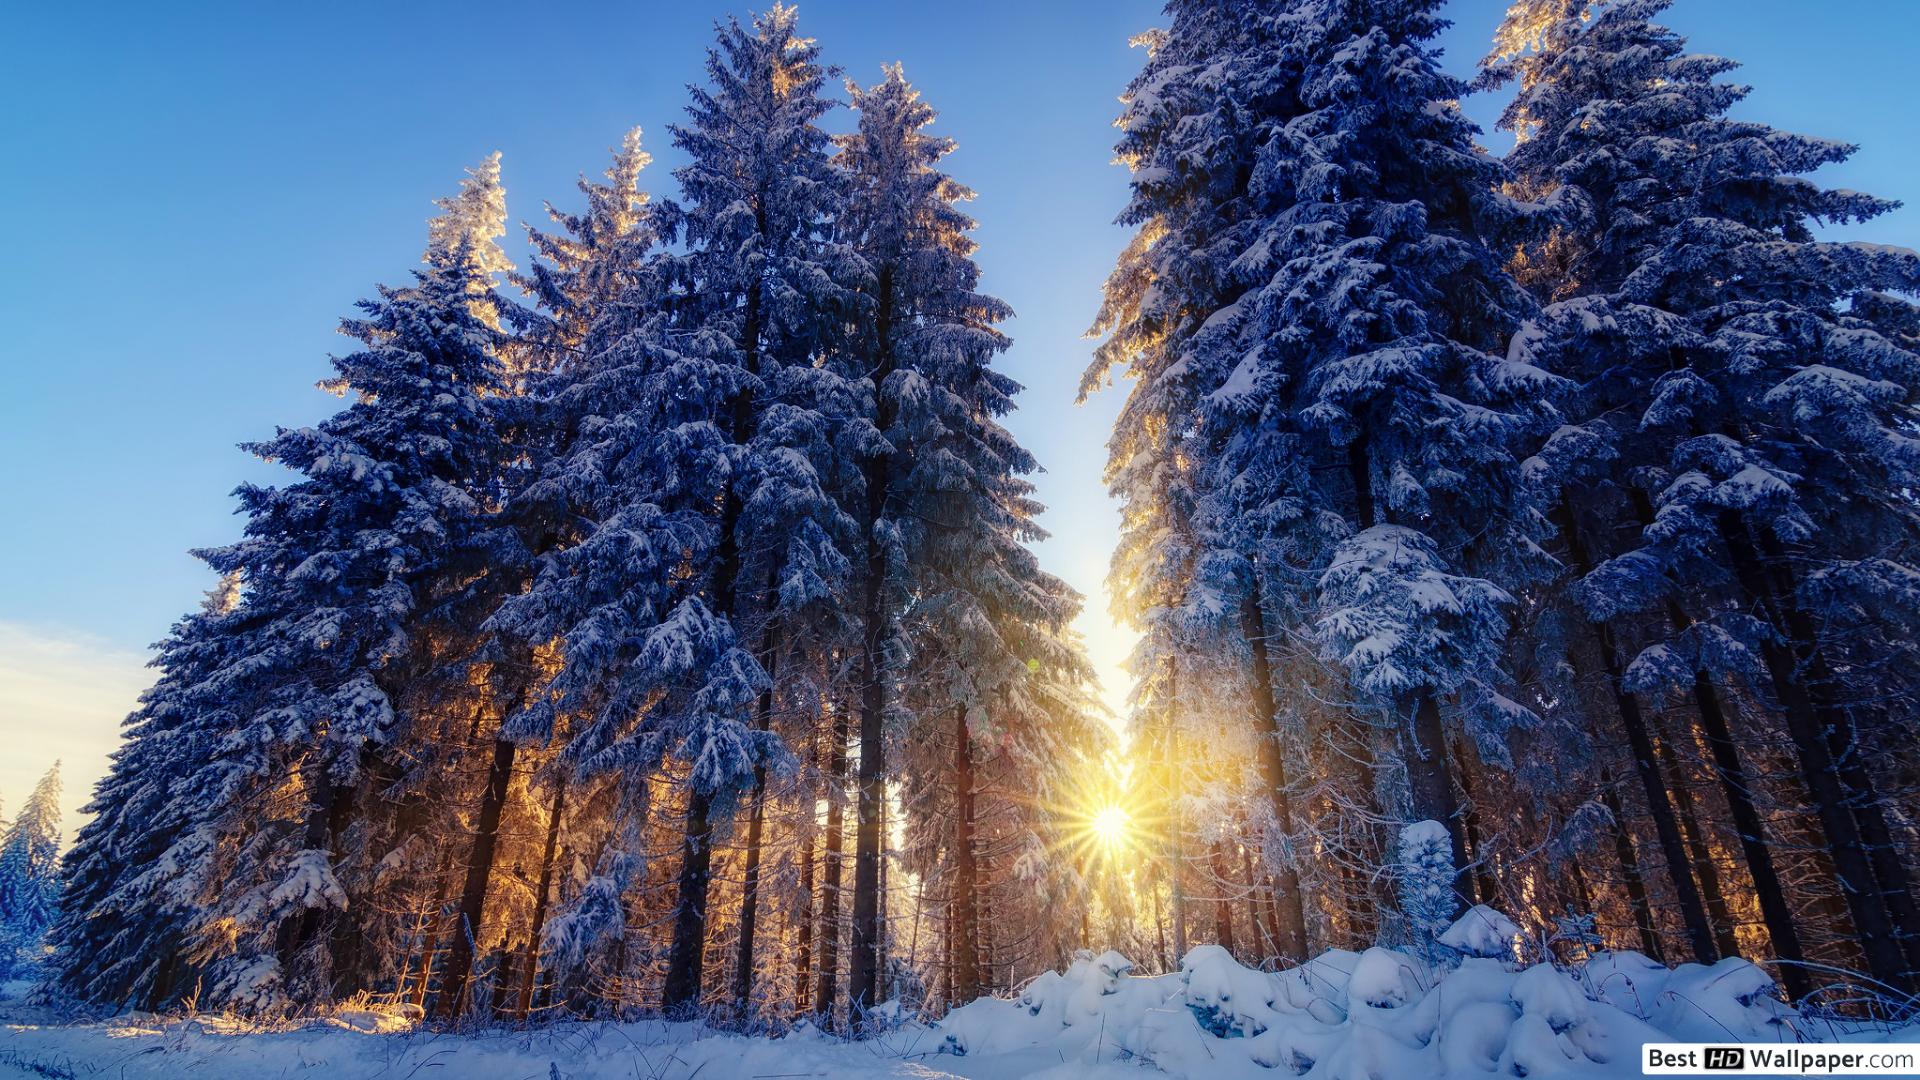 Tall Trees in Winter Forest 2K wallpaper download